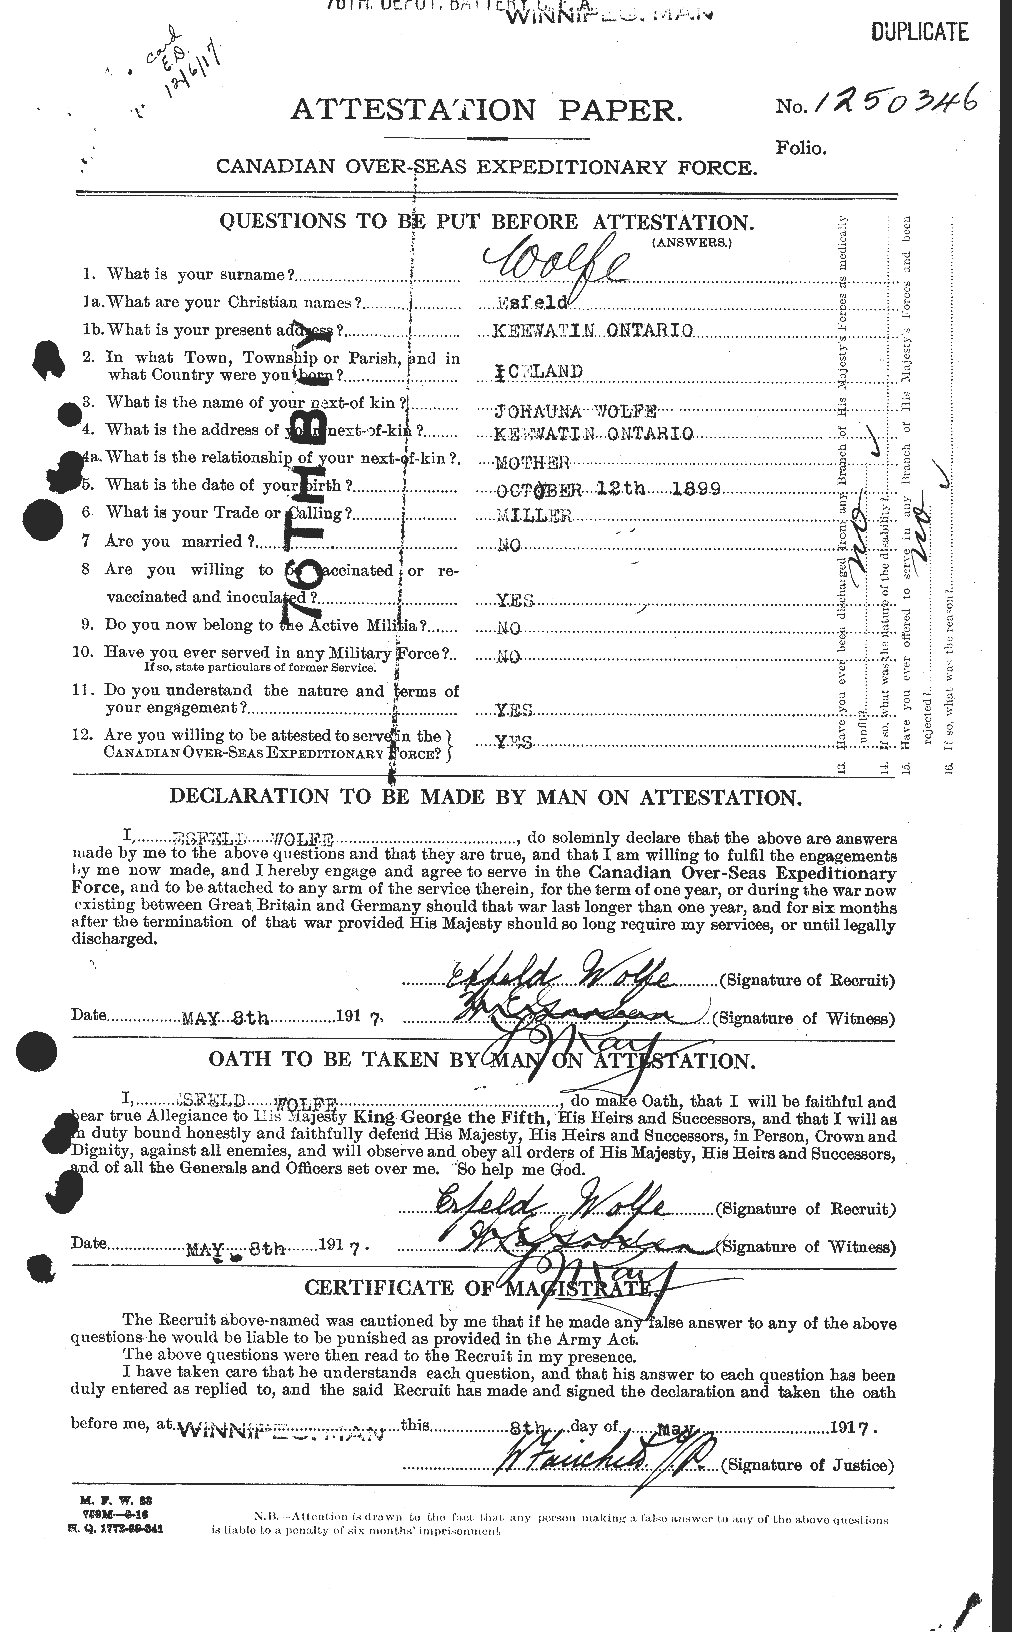 Personnel Records of the First World War - CEF 682329a